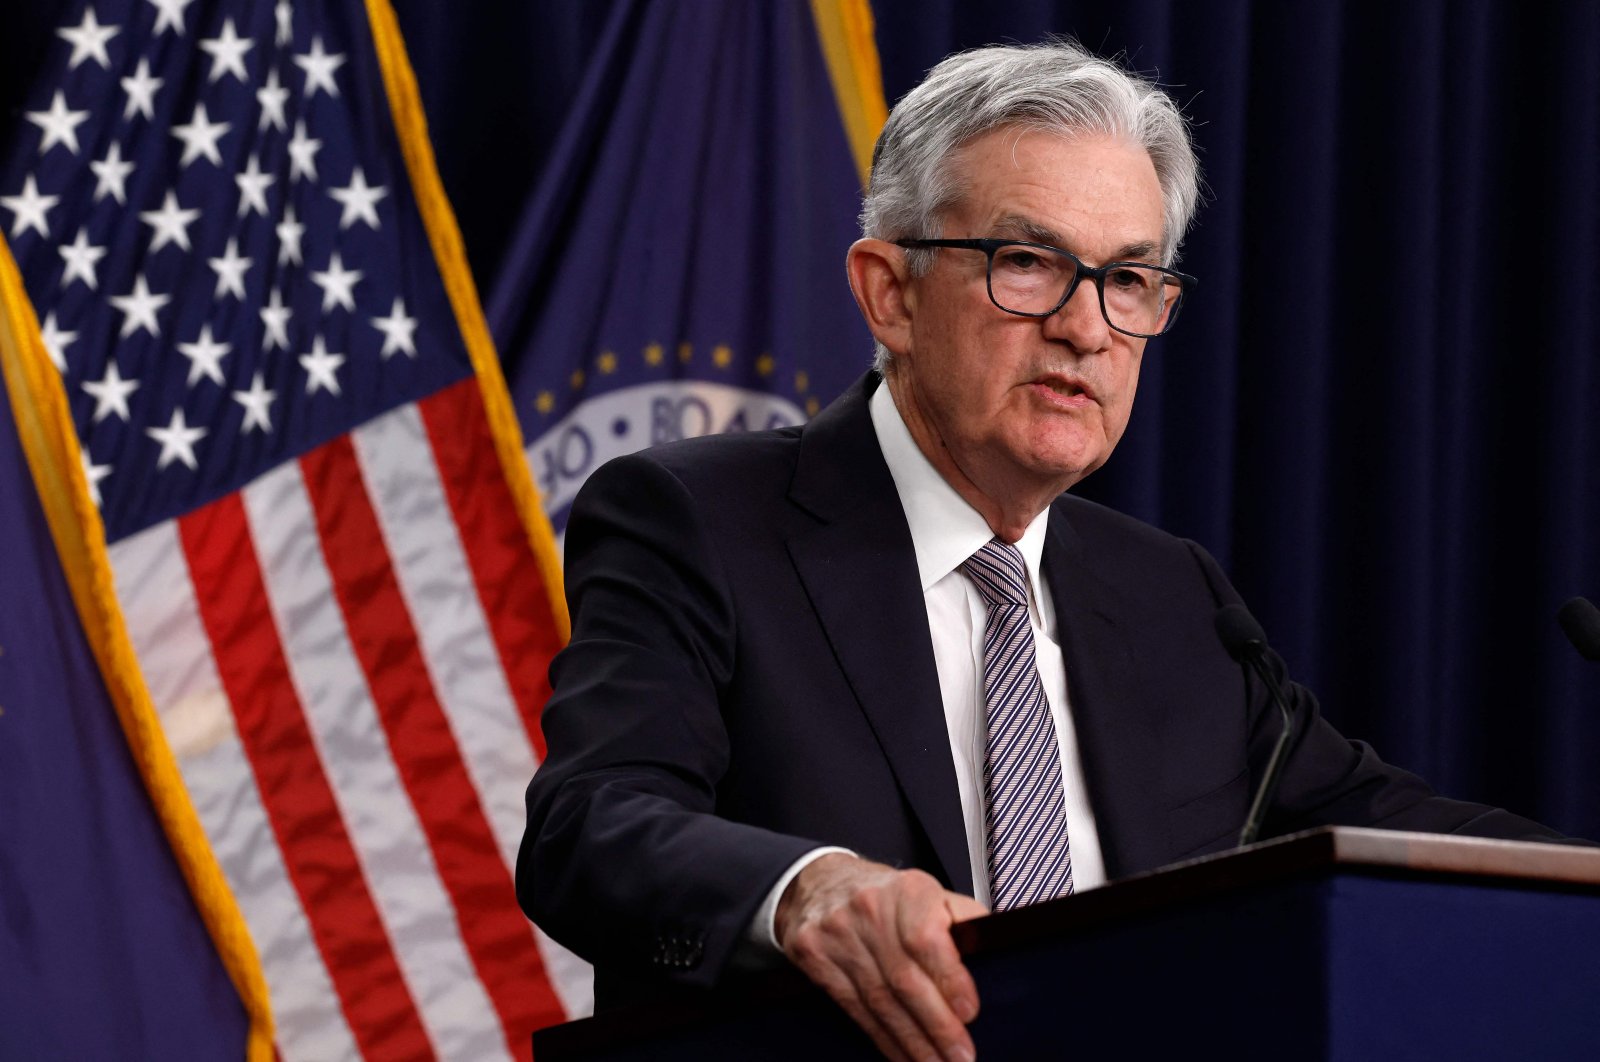 Federal Reserve Board Chairman Jerome Powell delivers remarks at a news conference following a Federal Open Market Committee meeting in Washington, D.C.  on May 3, 2023. (AFP Photo)